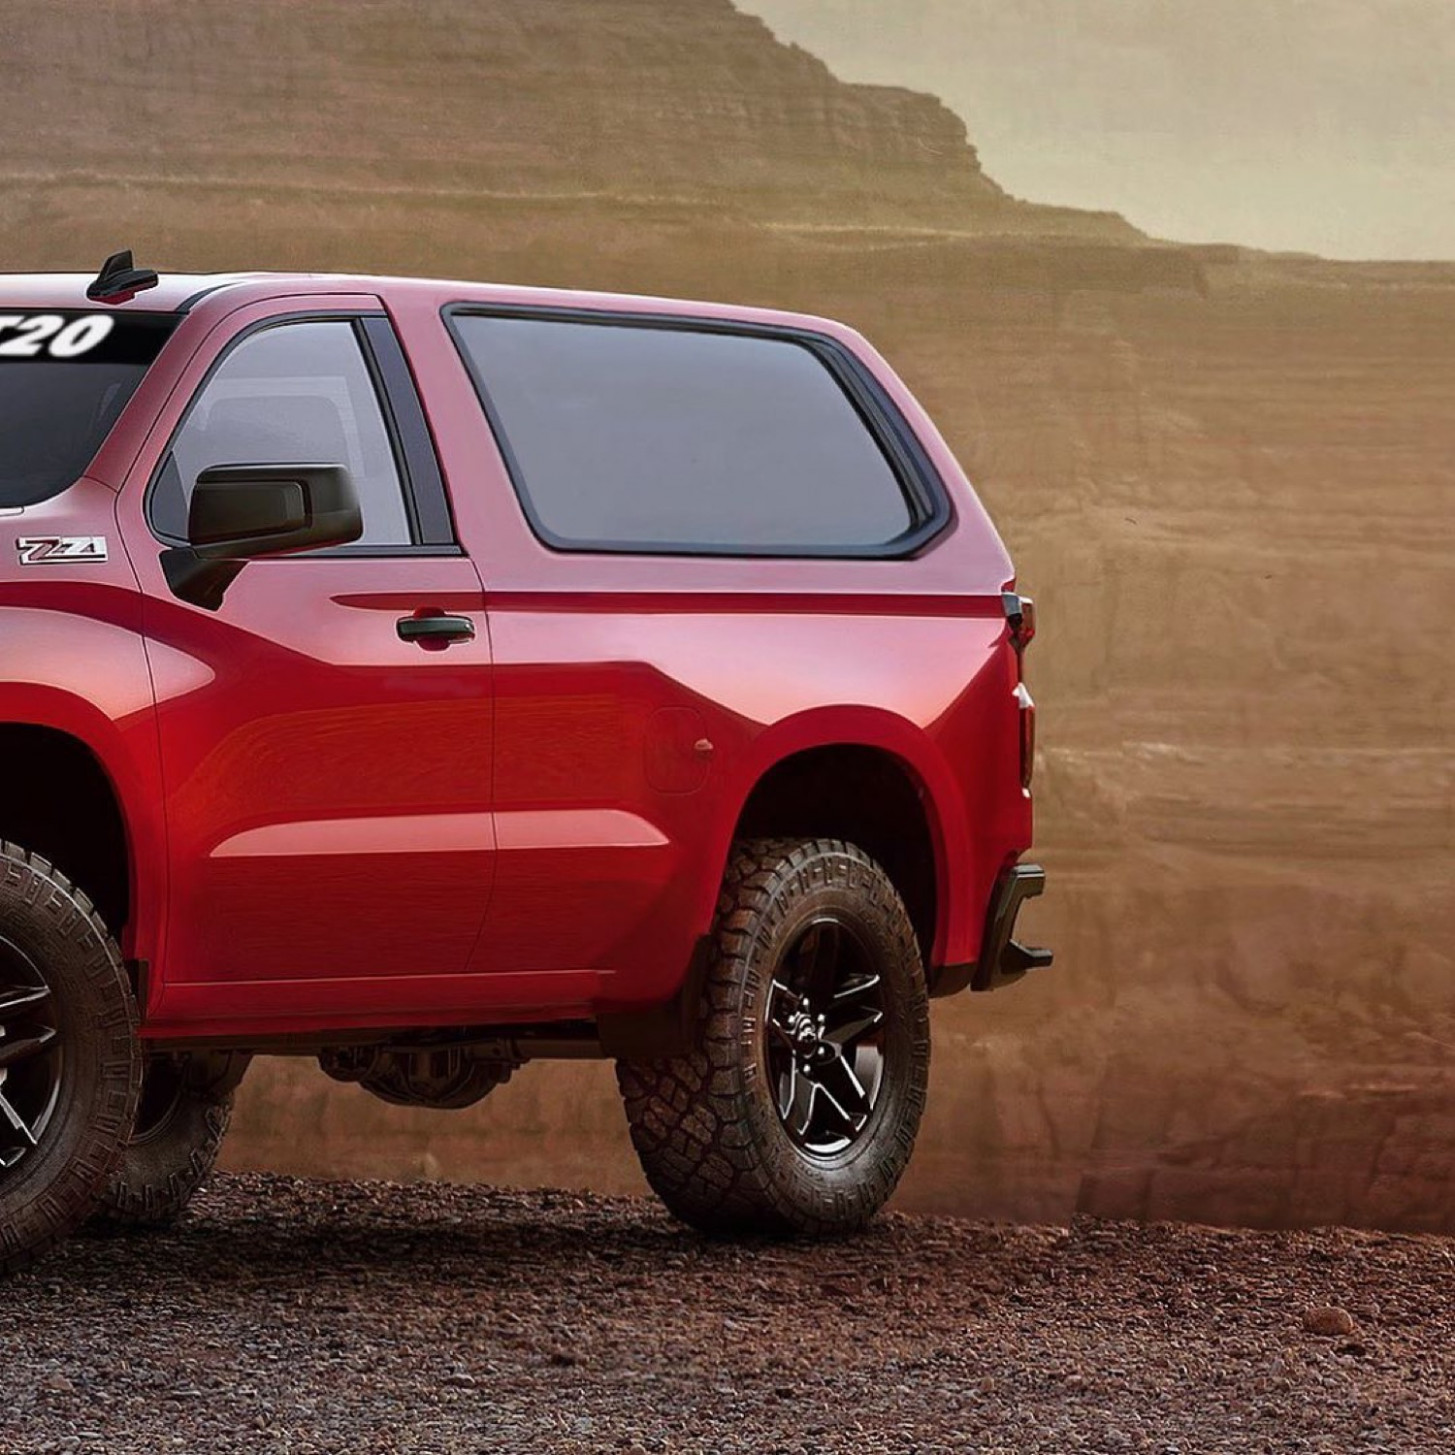 Performance and New Engine 2022 The Chevy Blazer